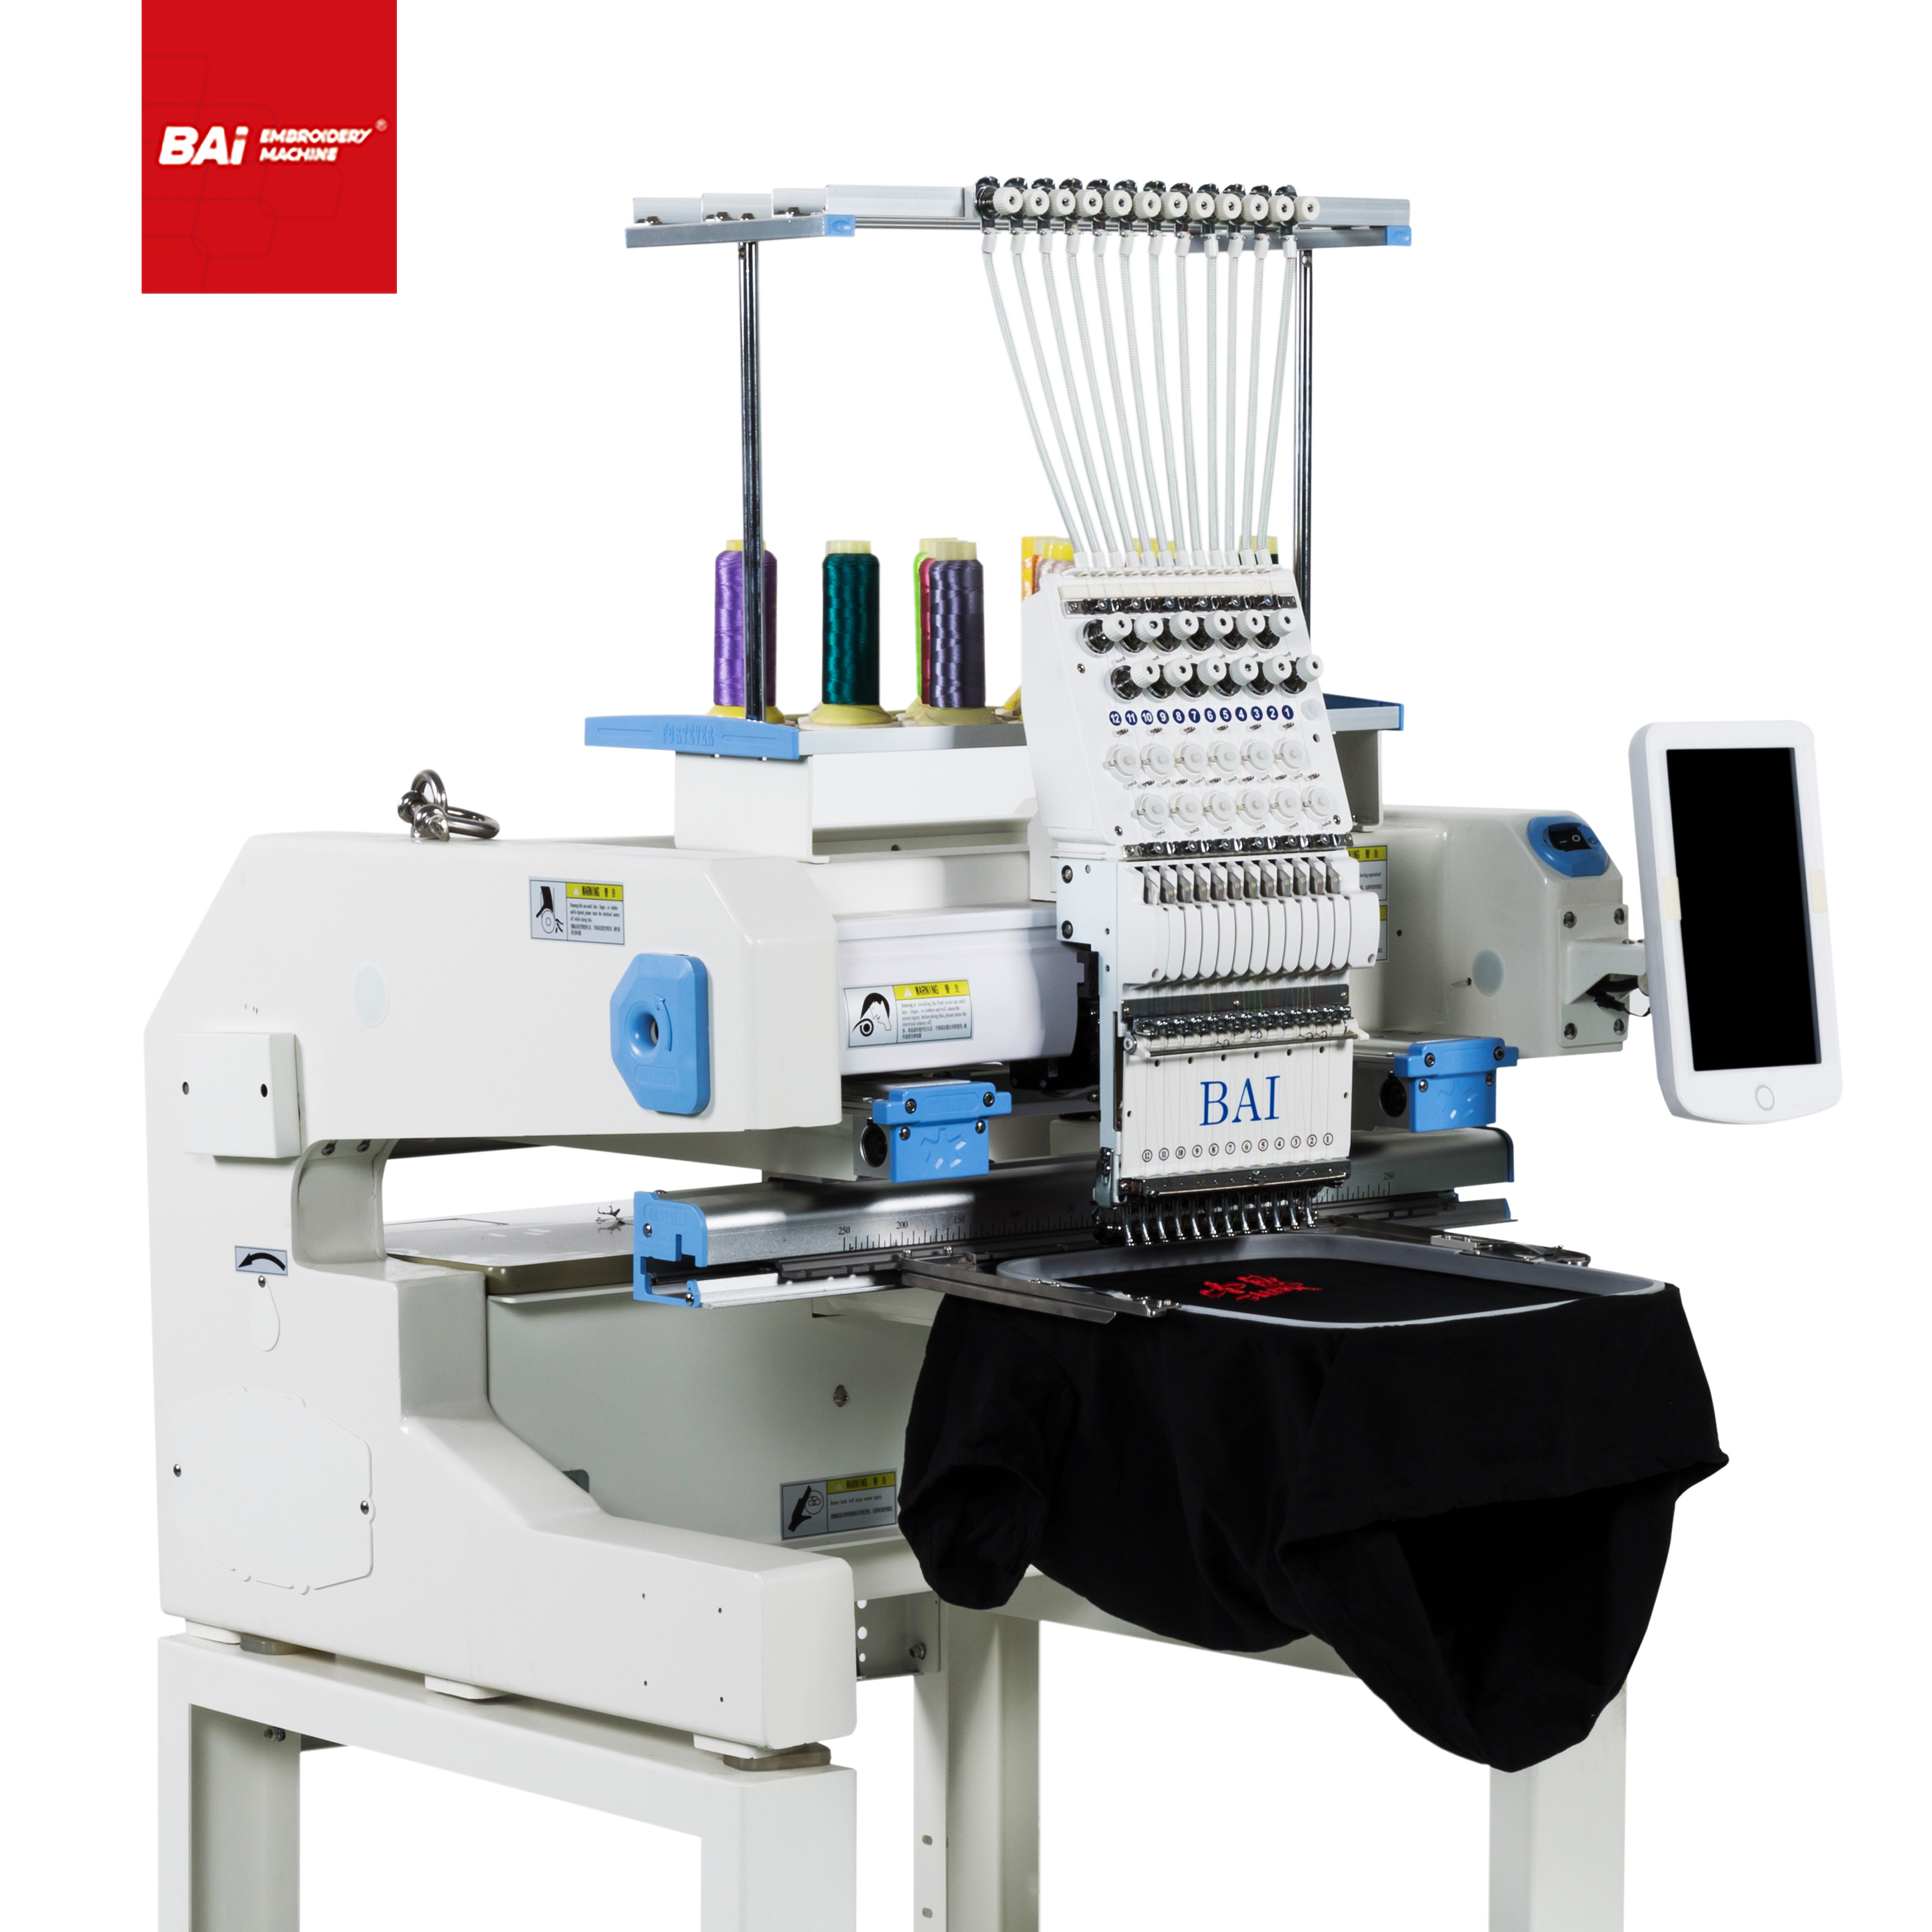 BAI T-shirt Computerized Embroidery Machine for Household with Computerized